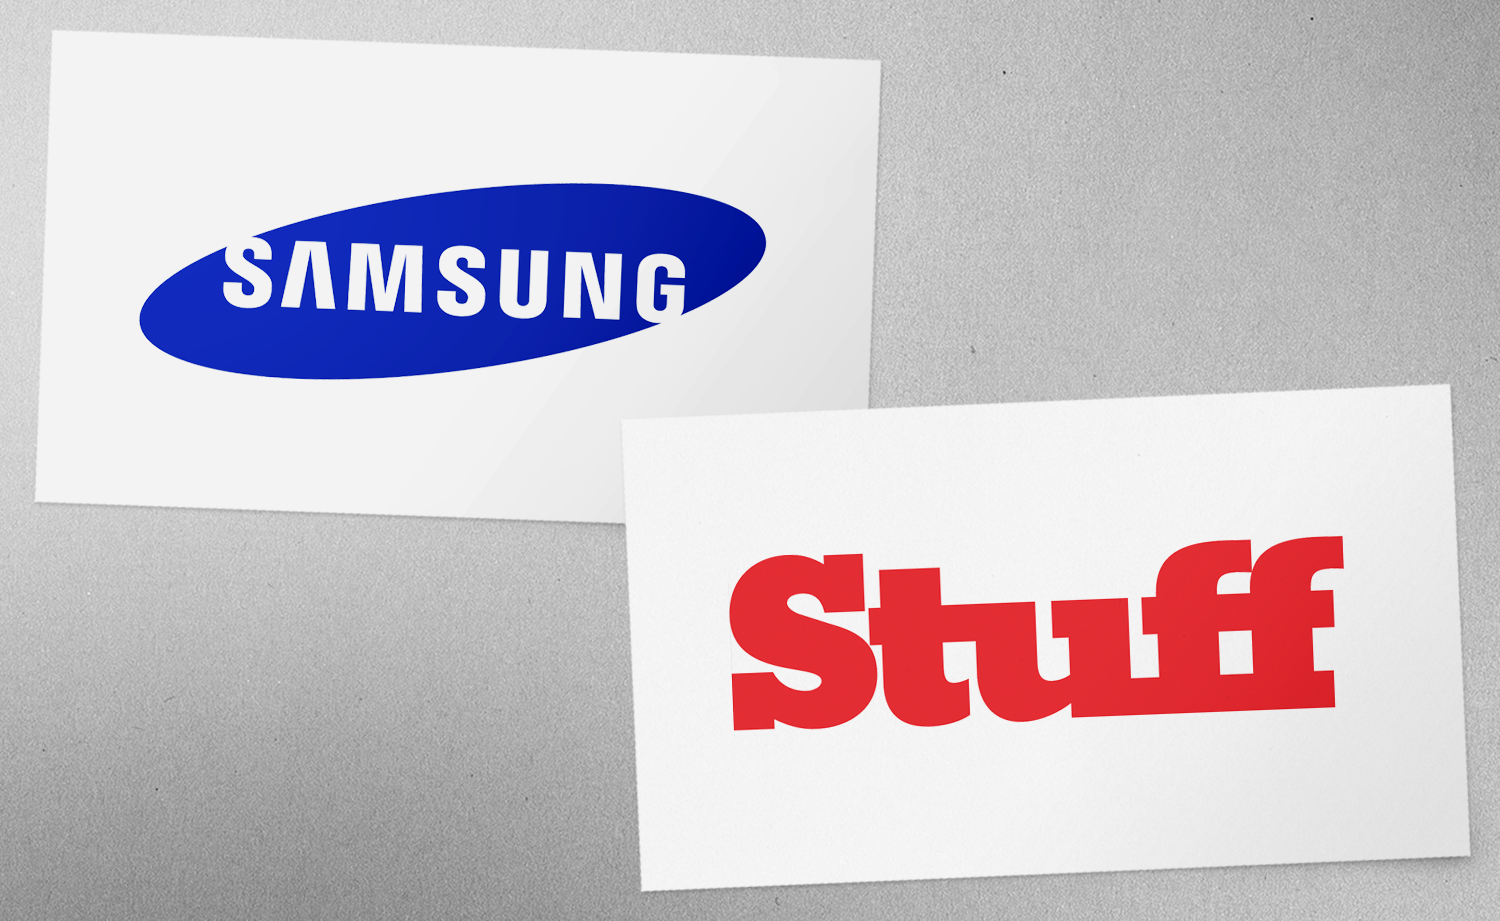 BPR supports Samsung at Stuff magazine inauguration party